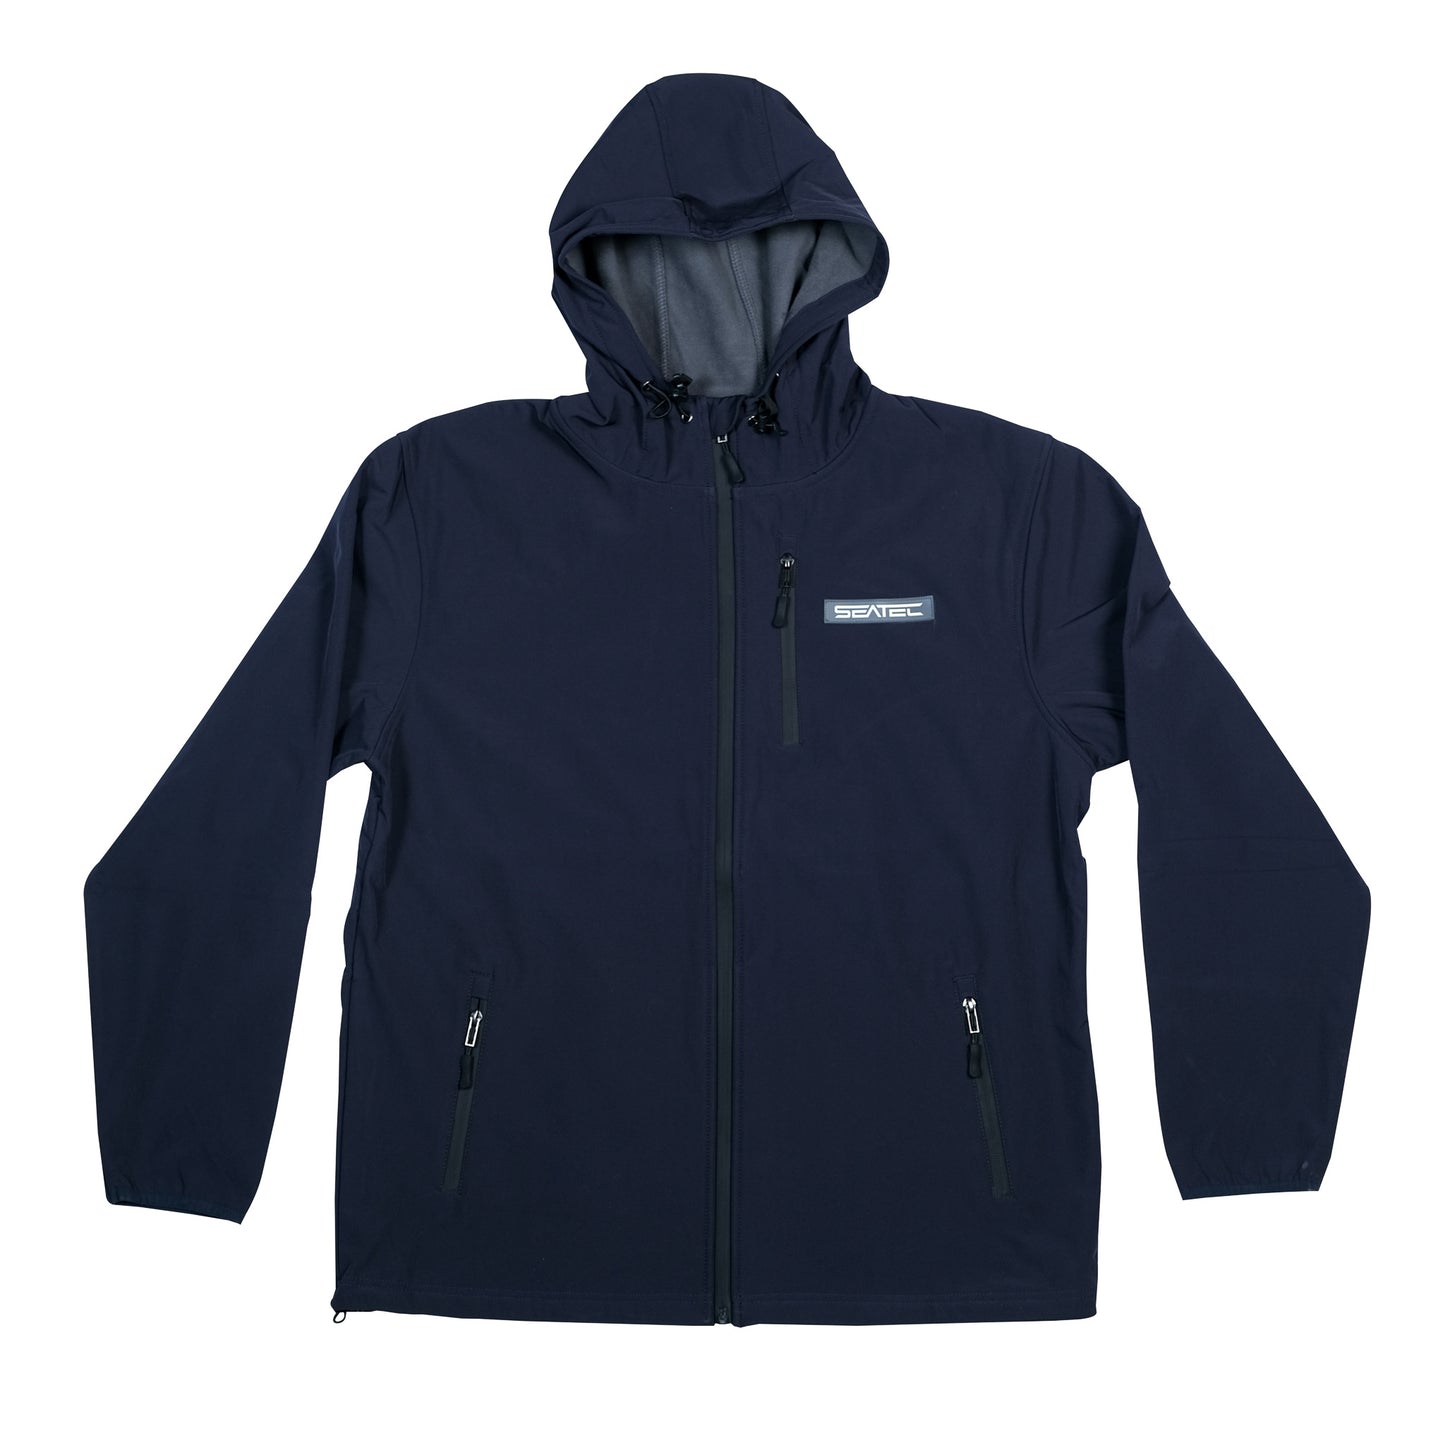 MEN'S POLY-TEC WATER-PROOF SOFT SHELL JACKET